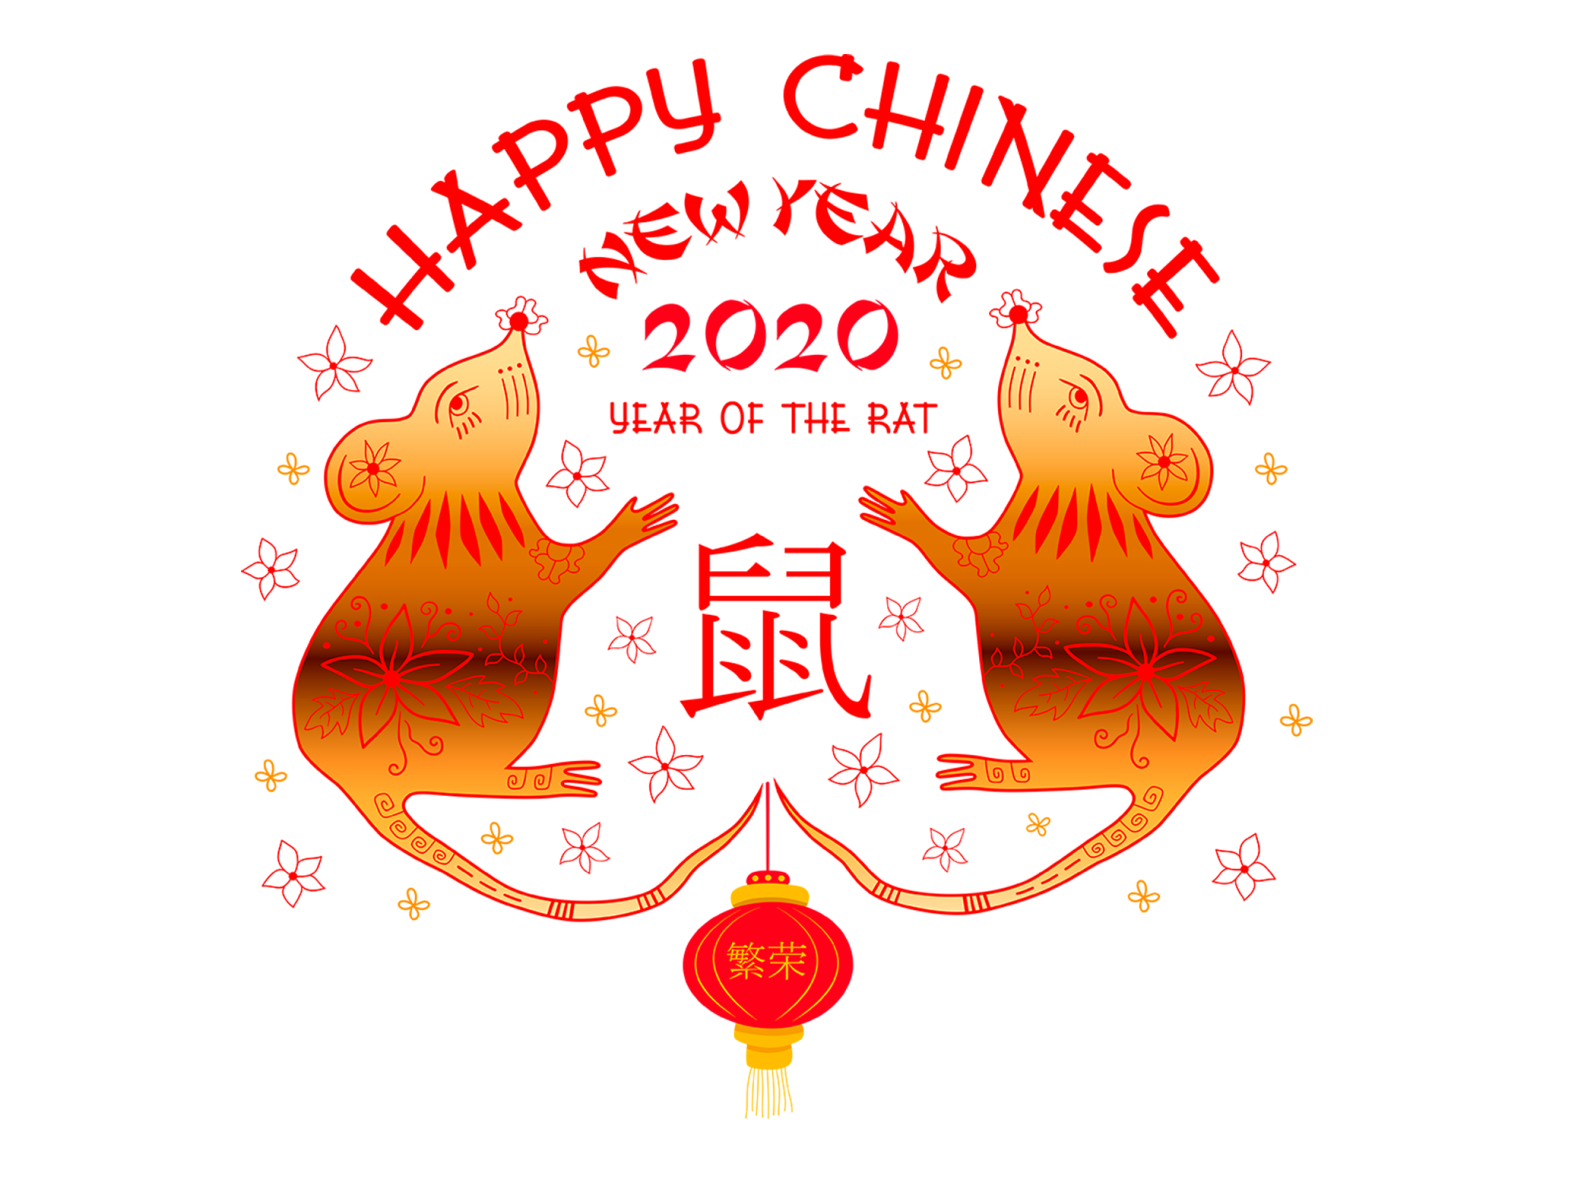 Happy Chinese New Year by Bariss Studio on Dribbble